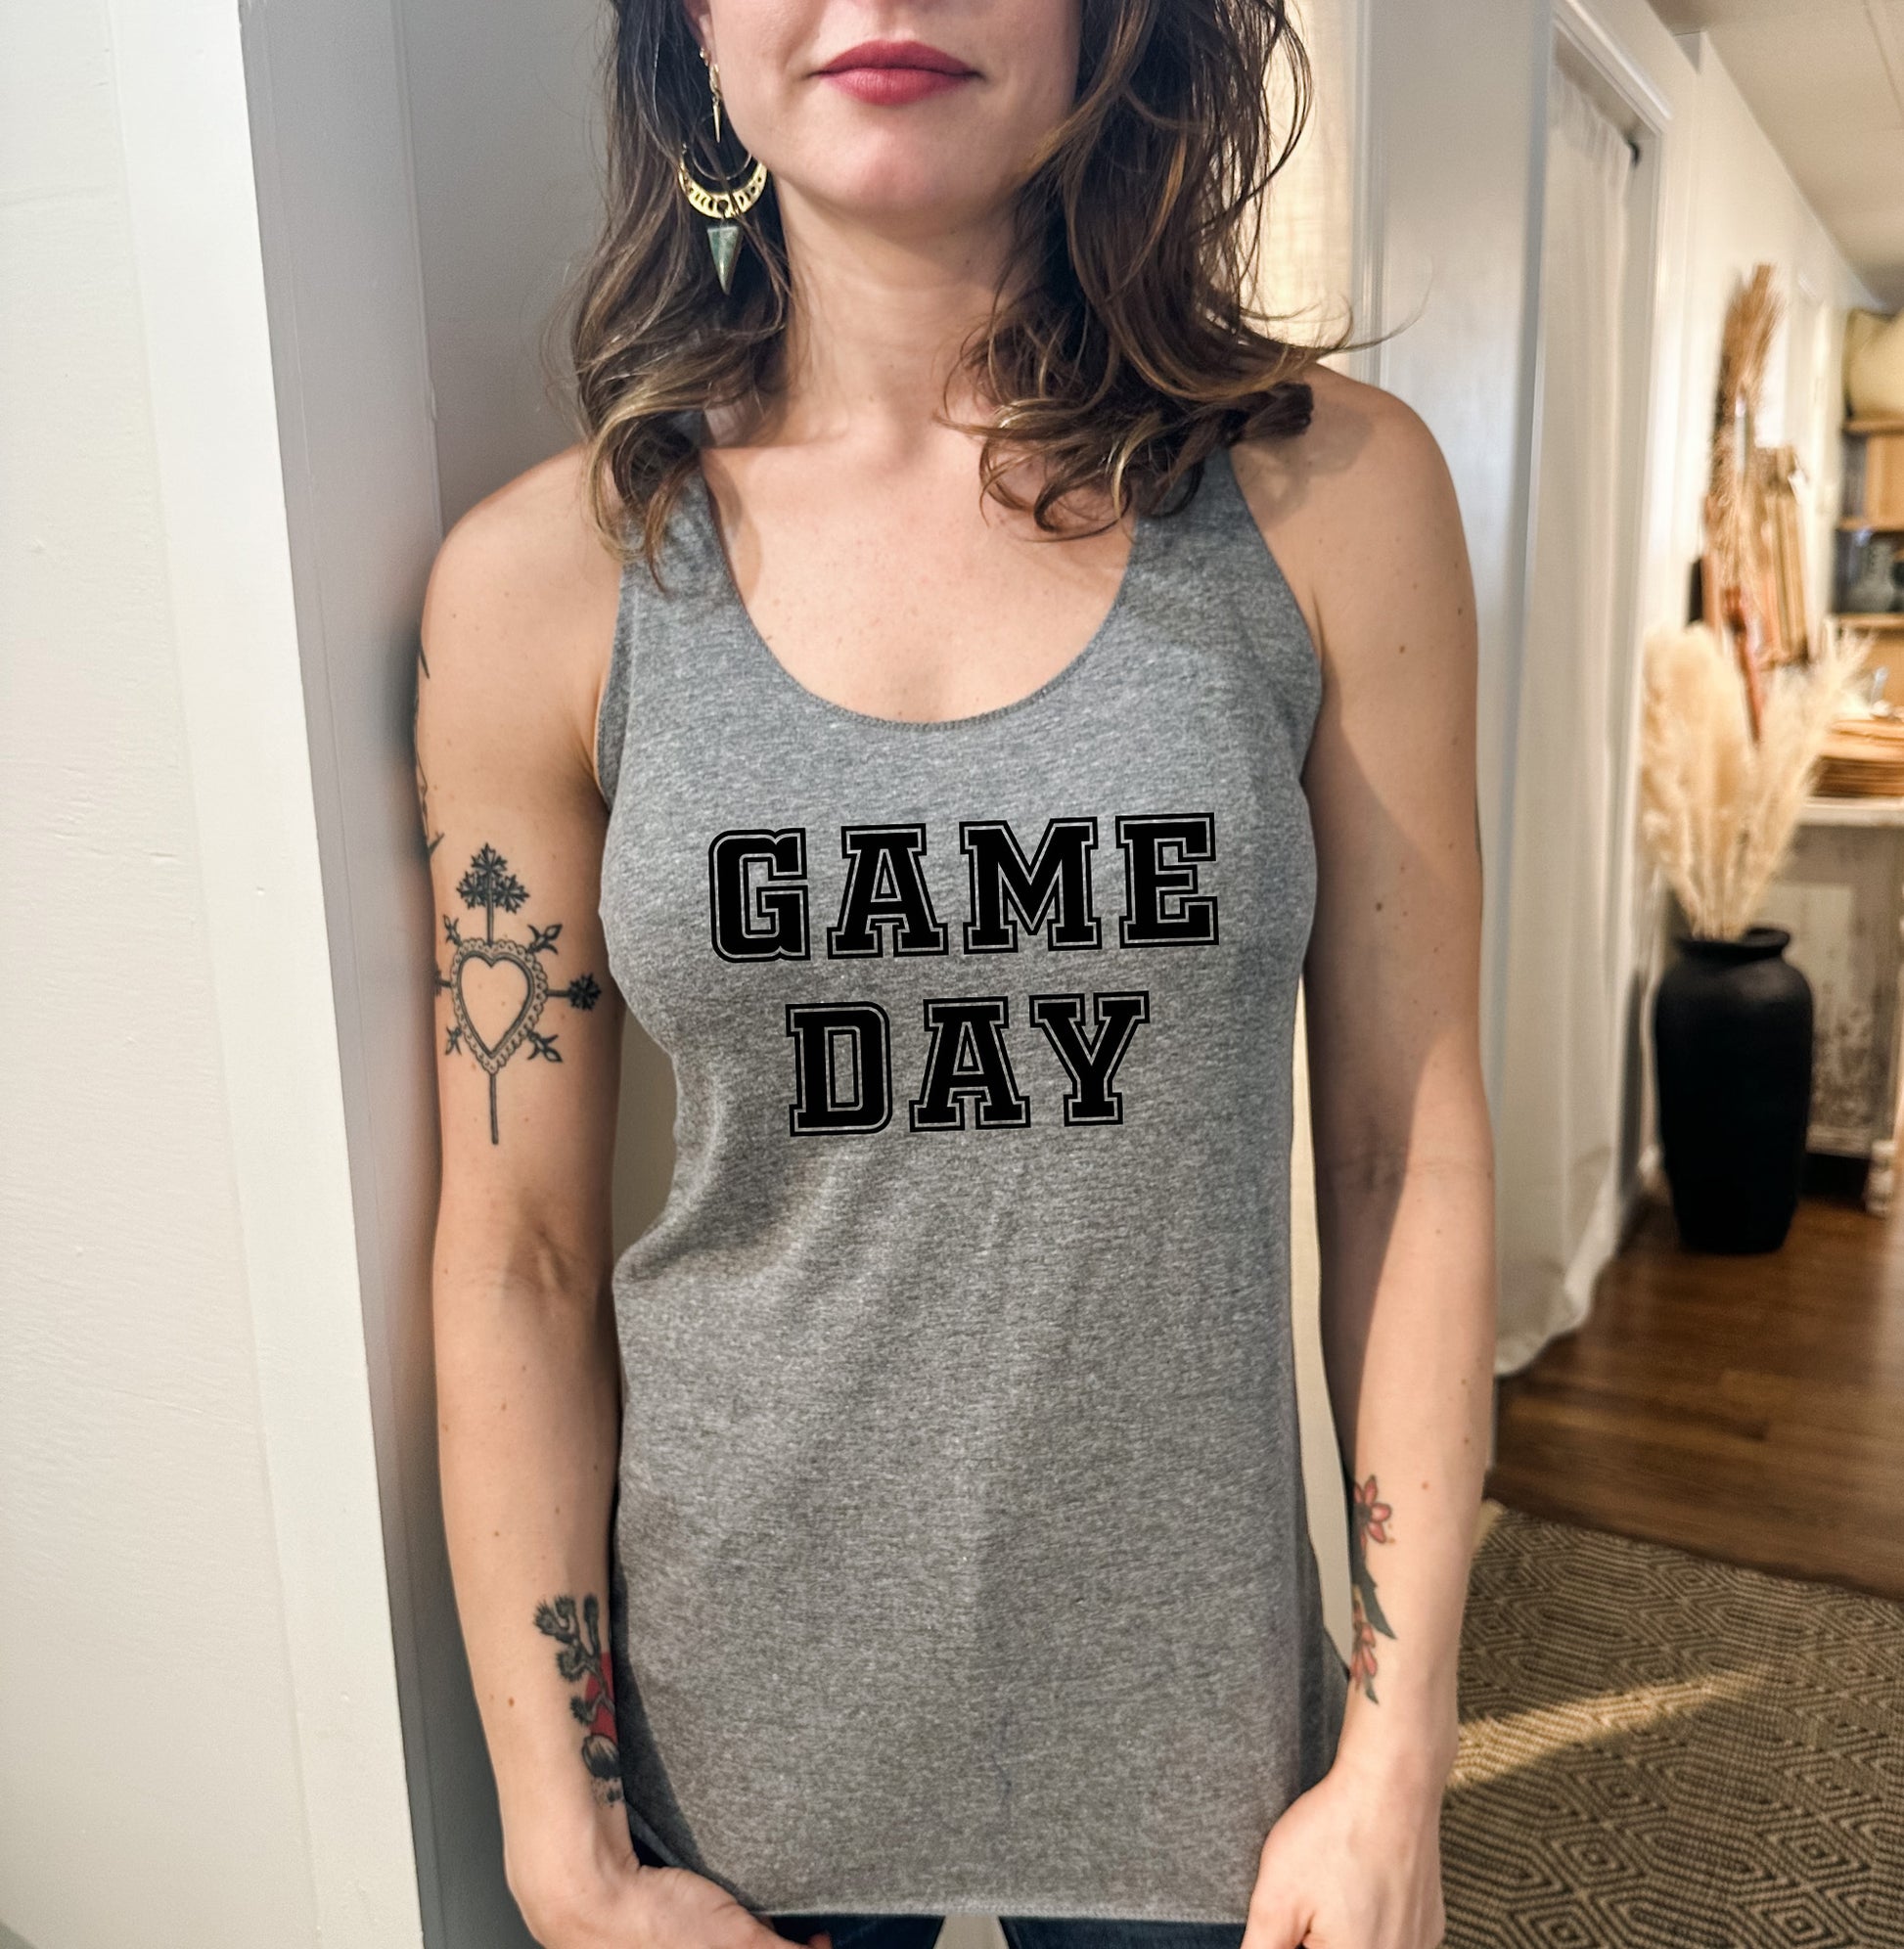 a woman wearing a gray tank top with game day on it